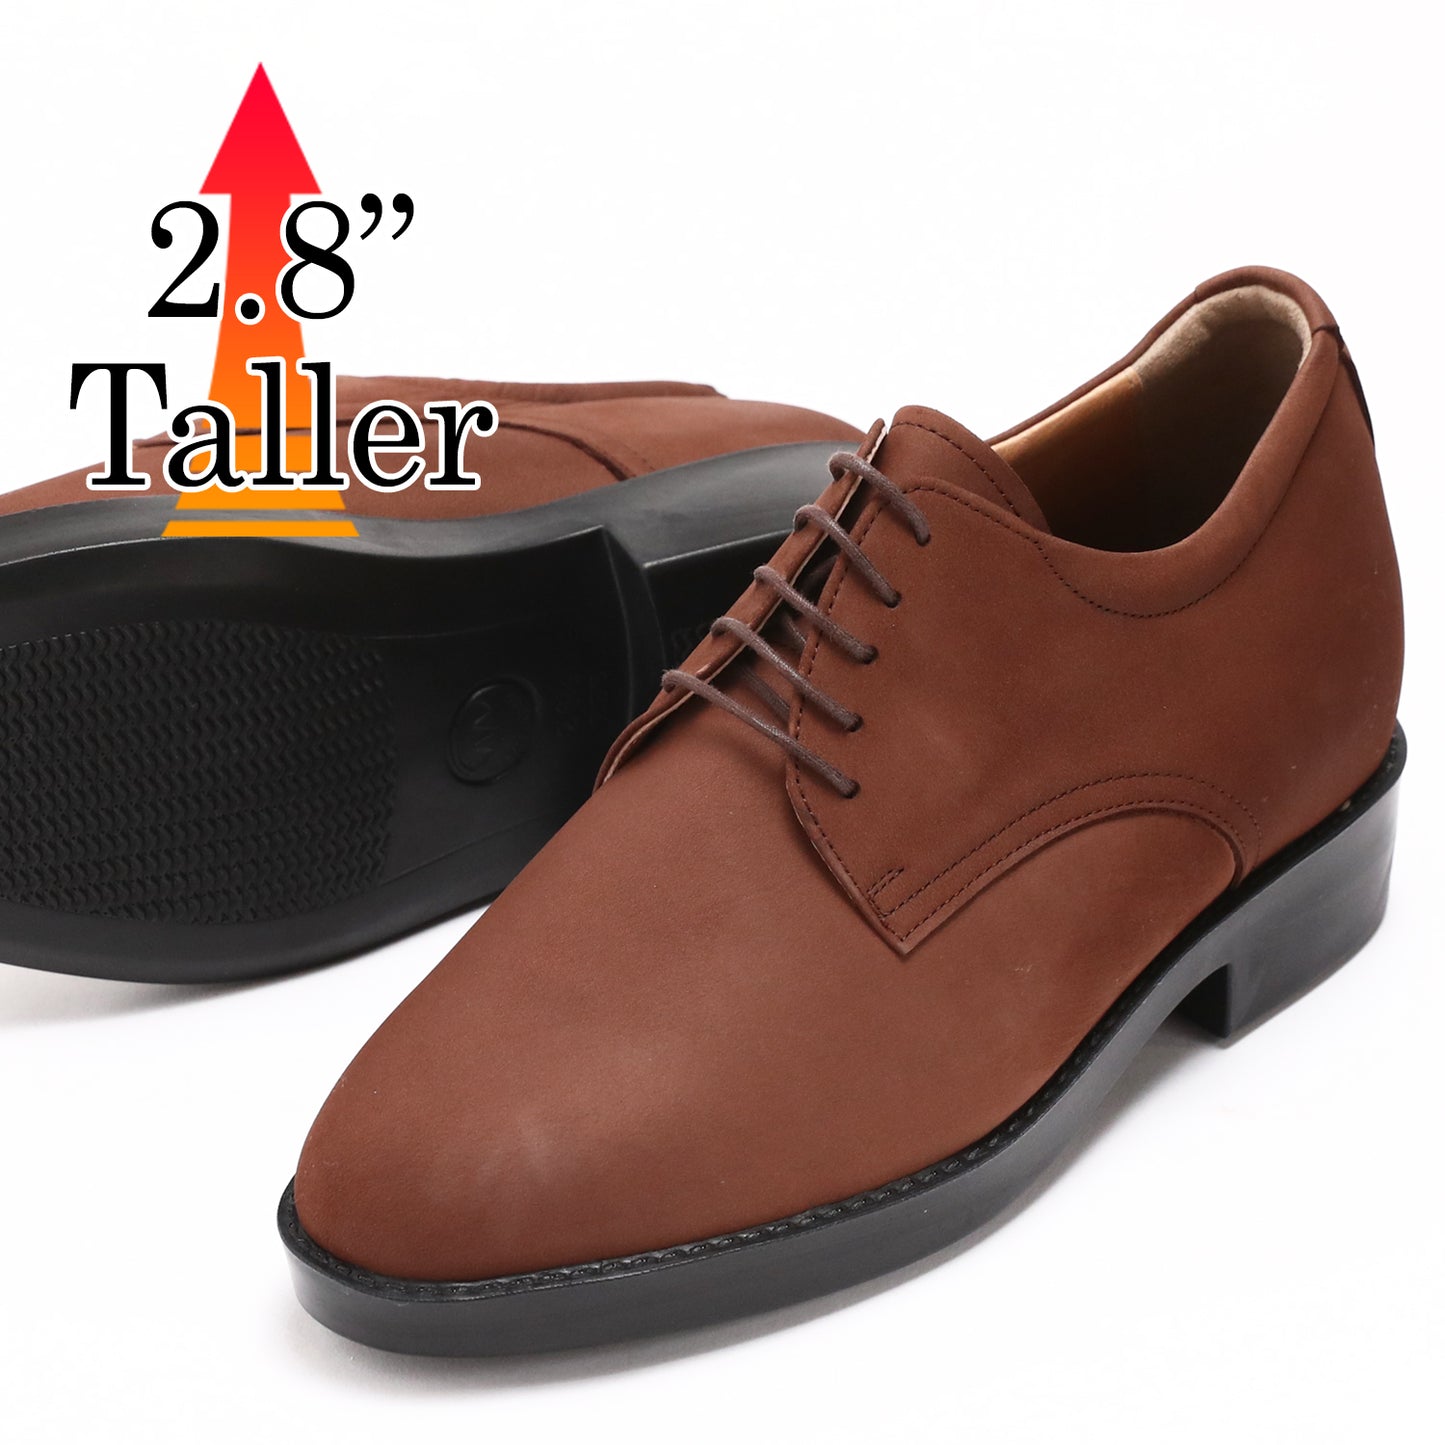 Men's Elevator Shoes Height Increasing 2.76" Taller Oxford Plain Toe Lace Up Casual Shoes Nubuck Leather No. 237